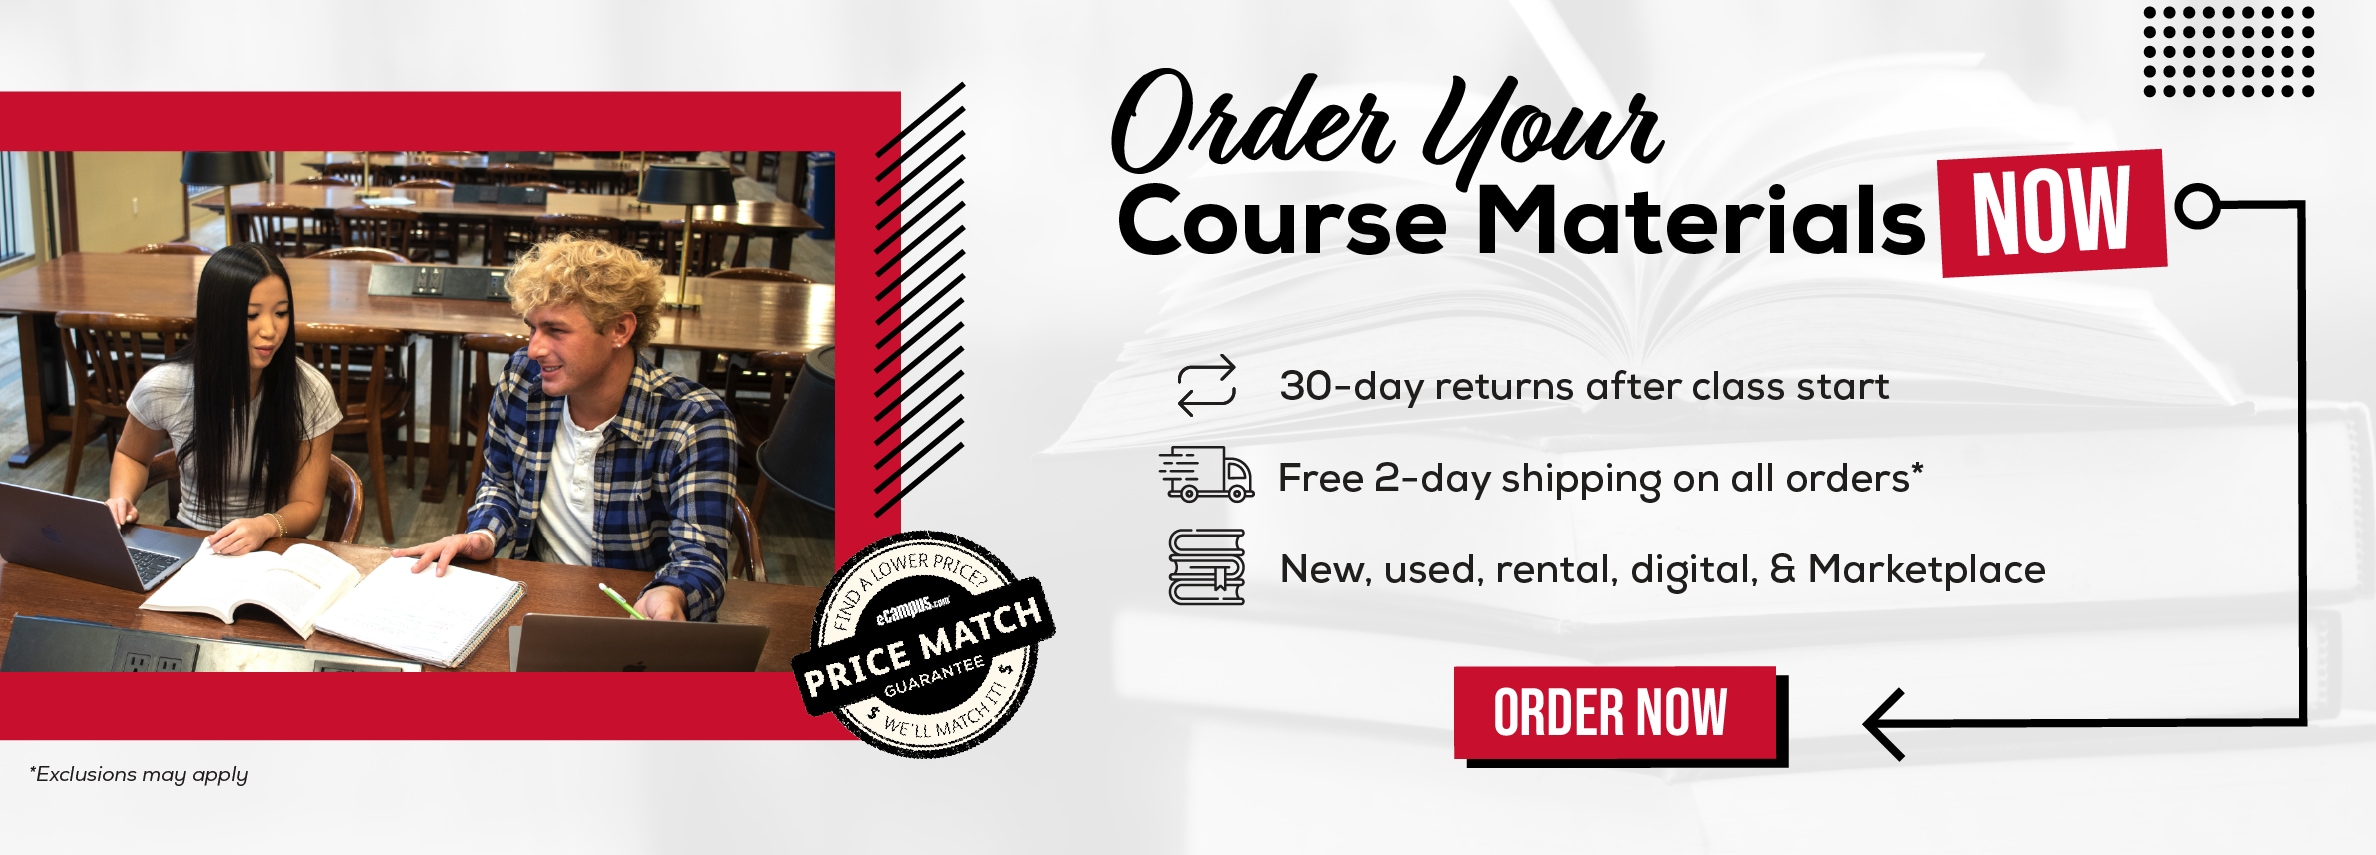 Order Your Course Materials Now. 30-day returns after class start. Free 2-day shipping on all orders* New, used, rental, digital, & Marketplace. Order now. *Exclusions may apply.